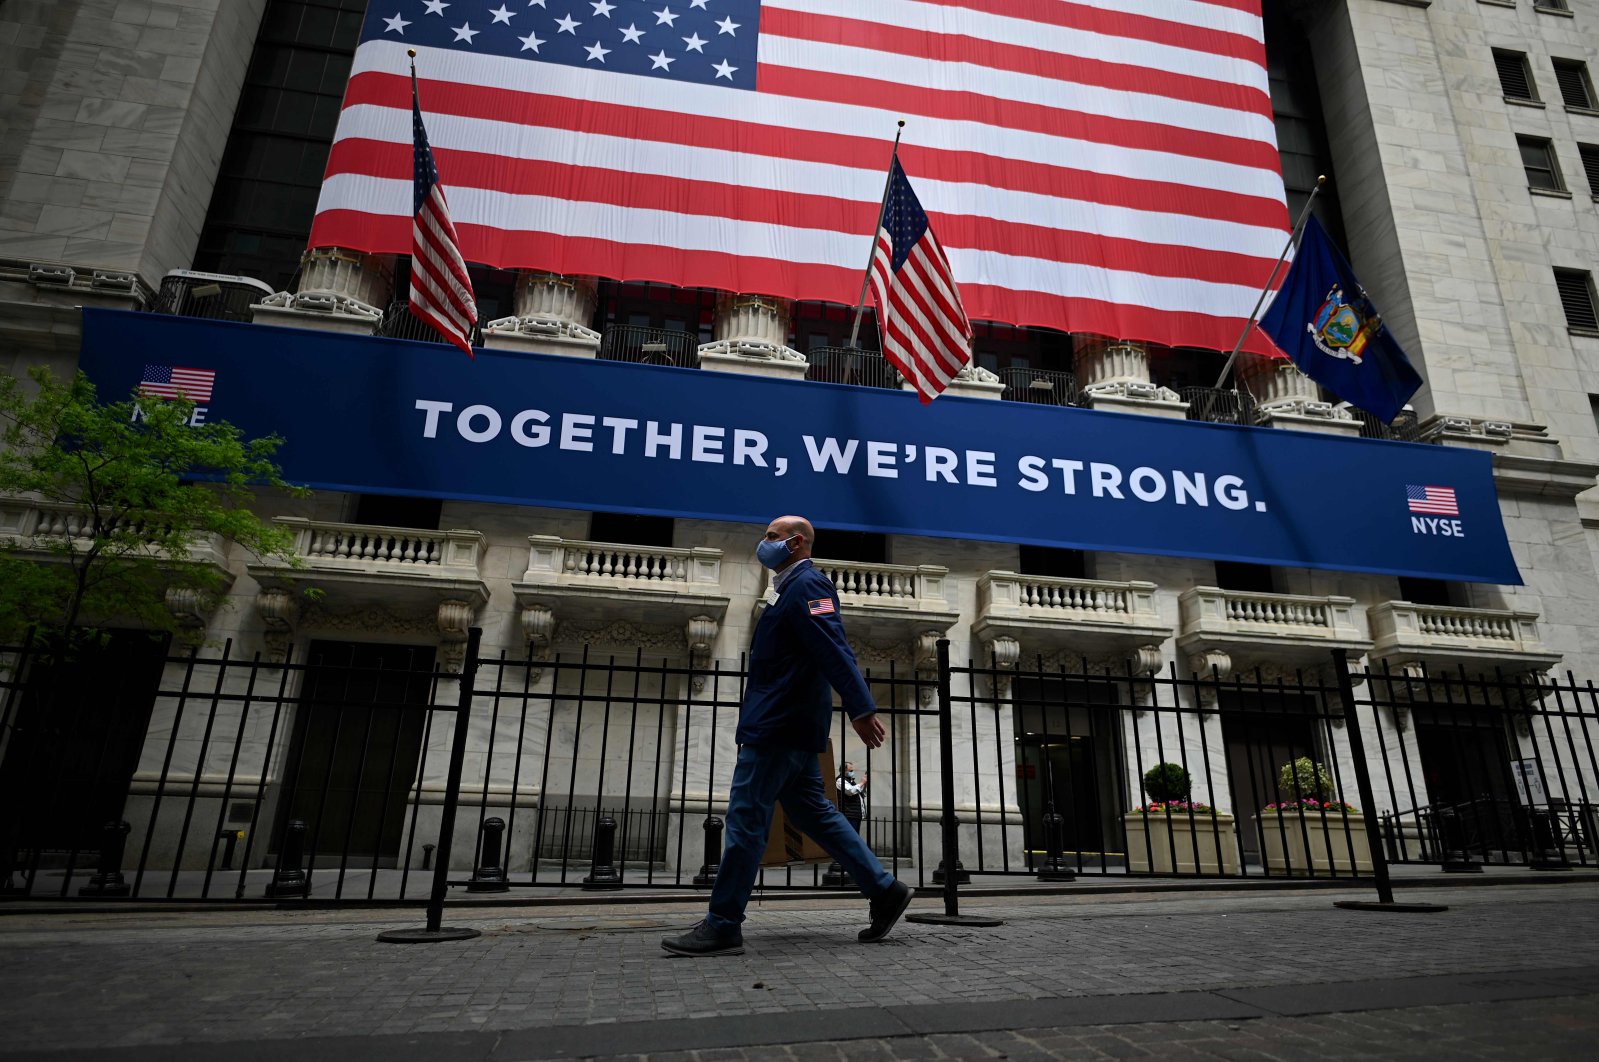 The New York Stock Exchange (NYSE) is pictured on May 26, 2020 at Wall Street in New York City. (AFP Photo)